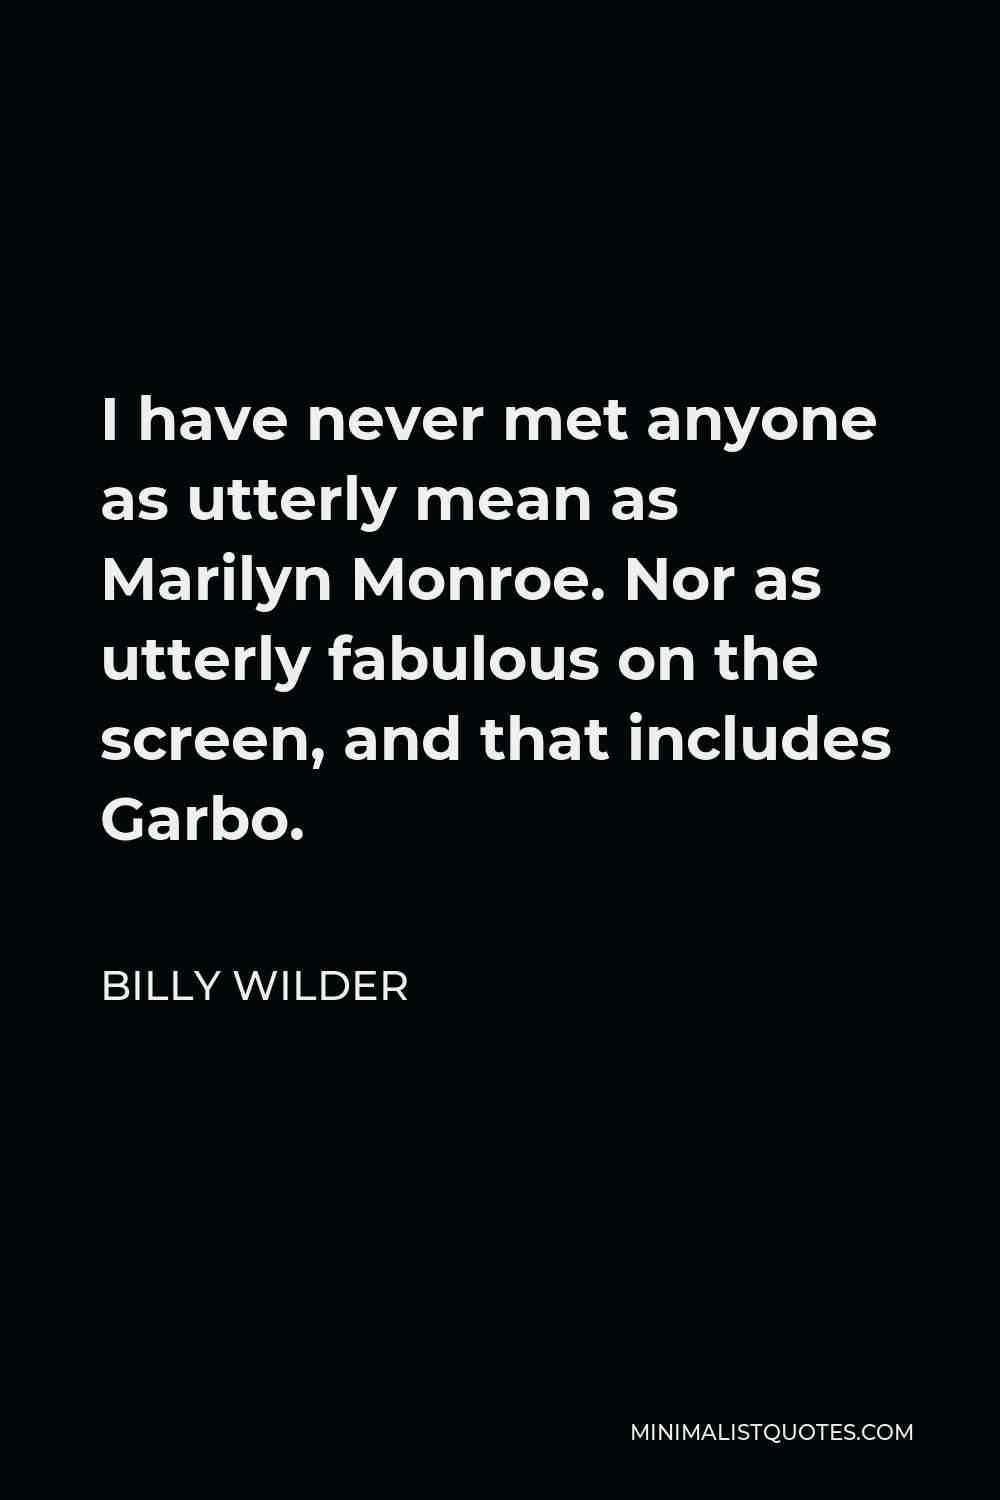 Billy Wilder Quote - I have never met anyone as utterly mean as Marilyn Monroe. Nor as utterly fabulous on the screen, and that includes Garbo.